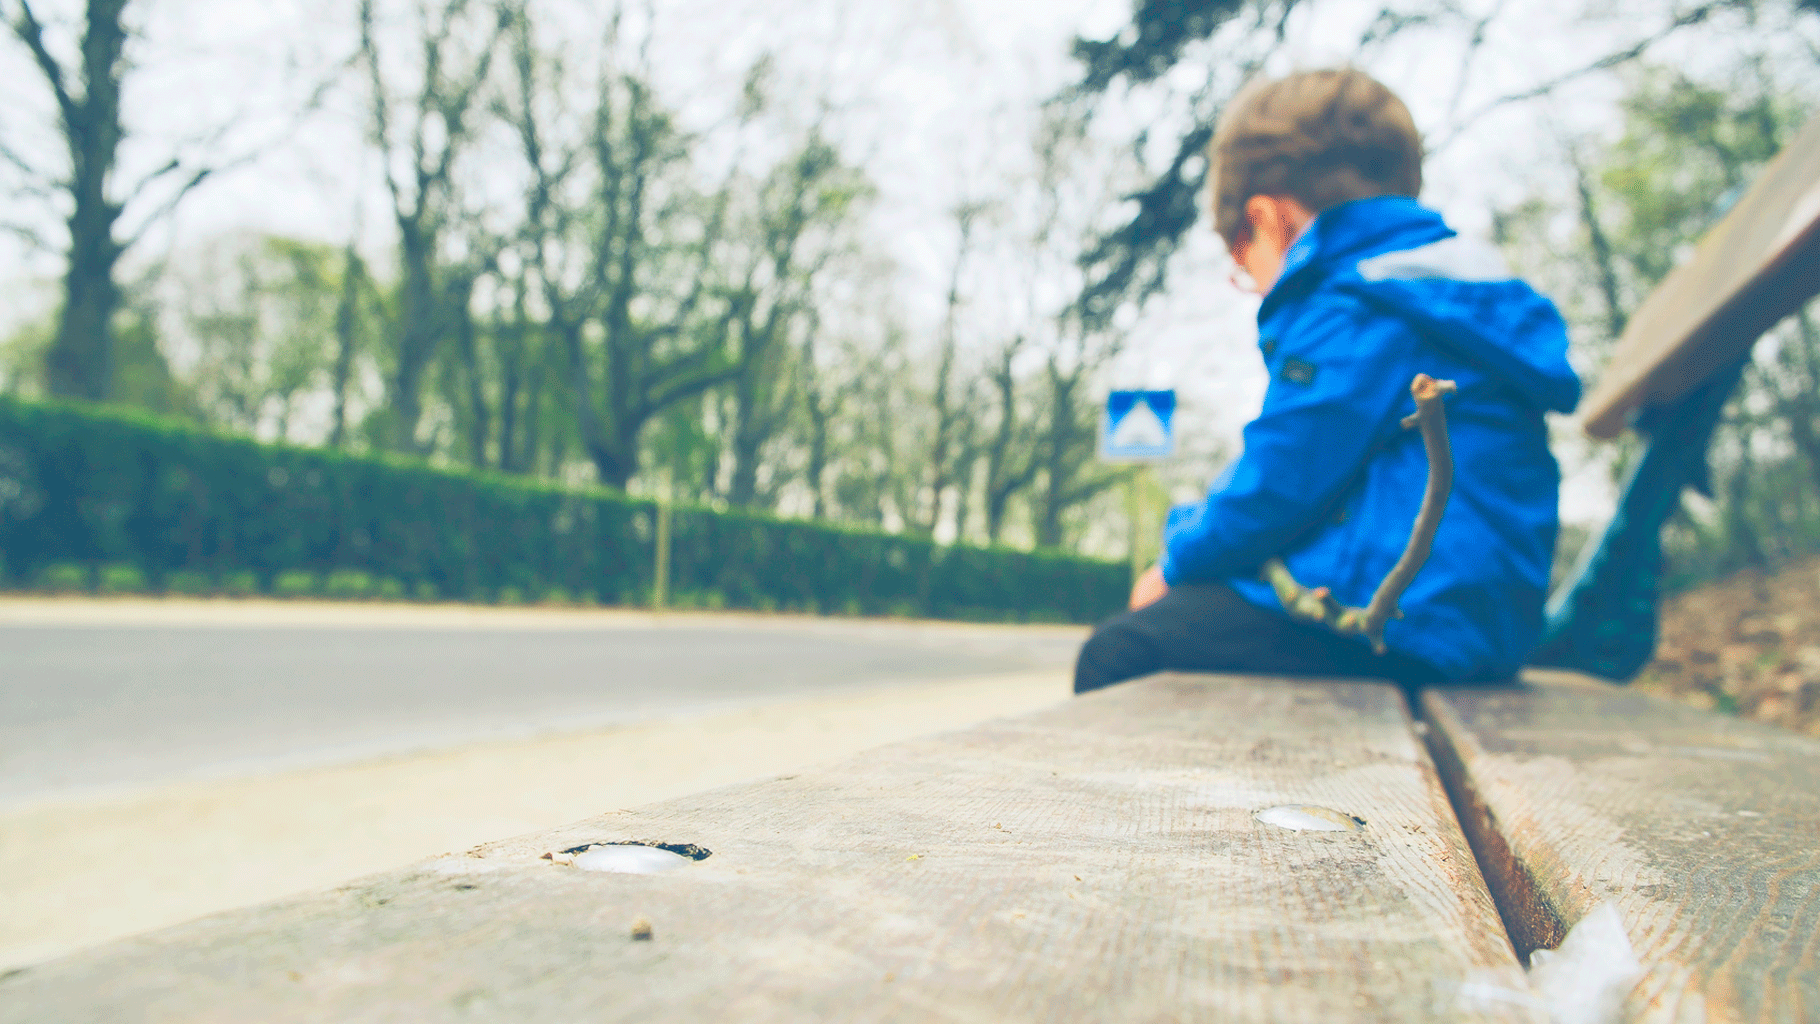 It’s not always a passing grumpy mood, depression in little preschoolers is real, say psychiatrists. It’s normal for little kids to have tantrums or tear up but they quickly bounce back. Depressed children, on the other hand, will appear sad even when playing their drawings maybe around the theme of death or other grave topics. (Photo: iStock)